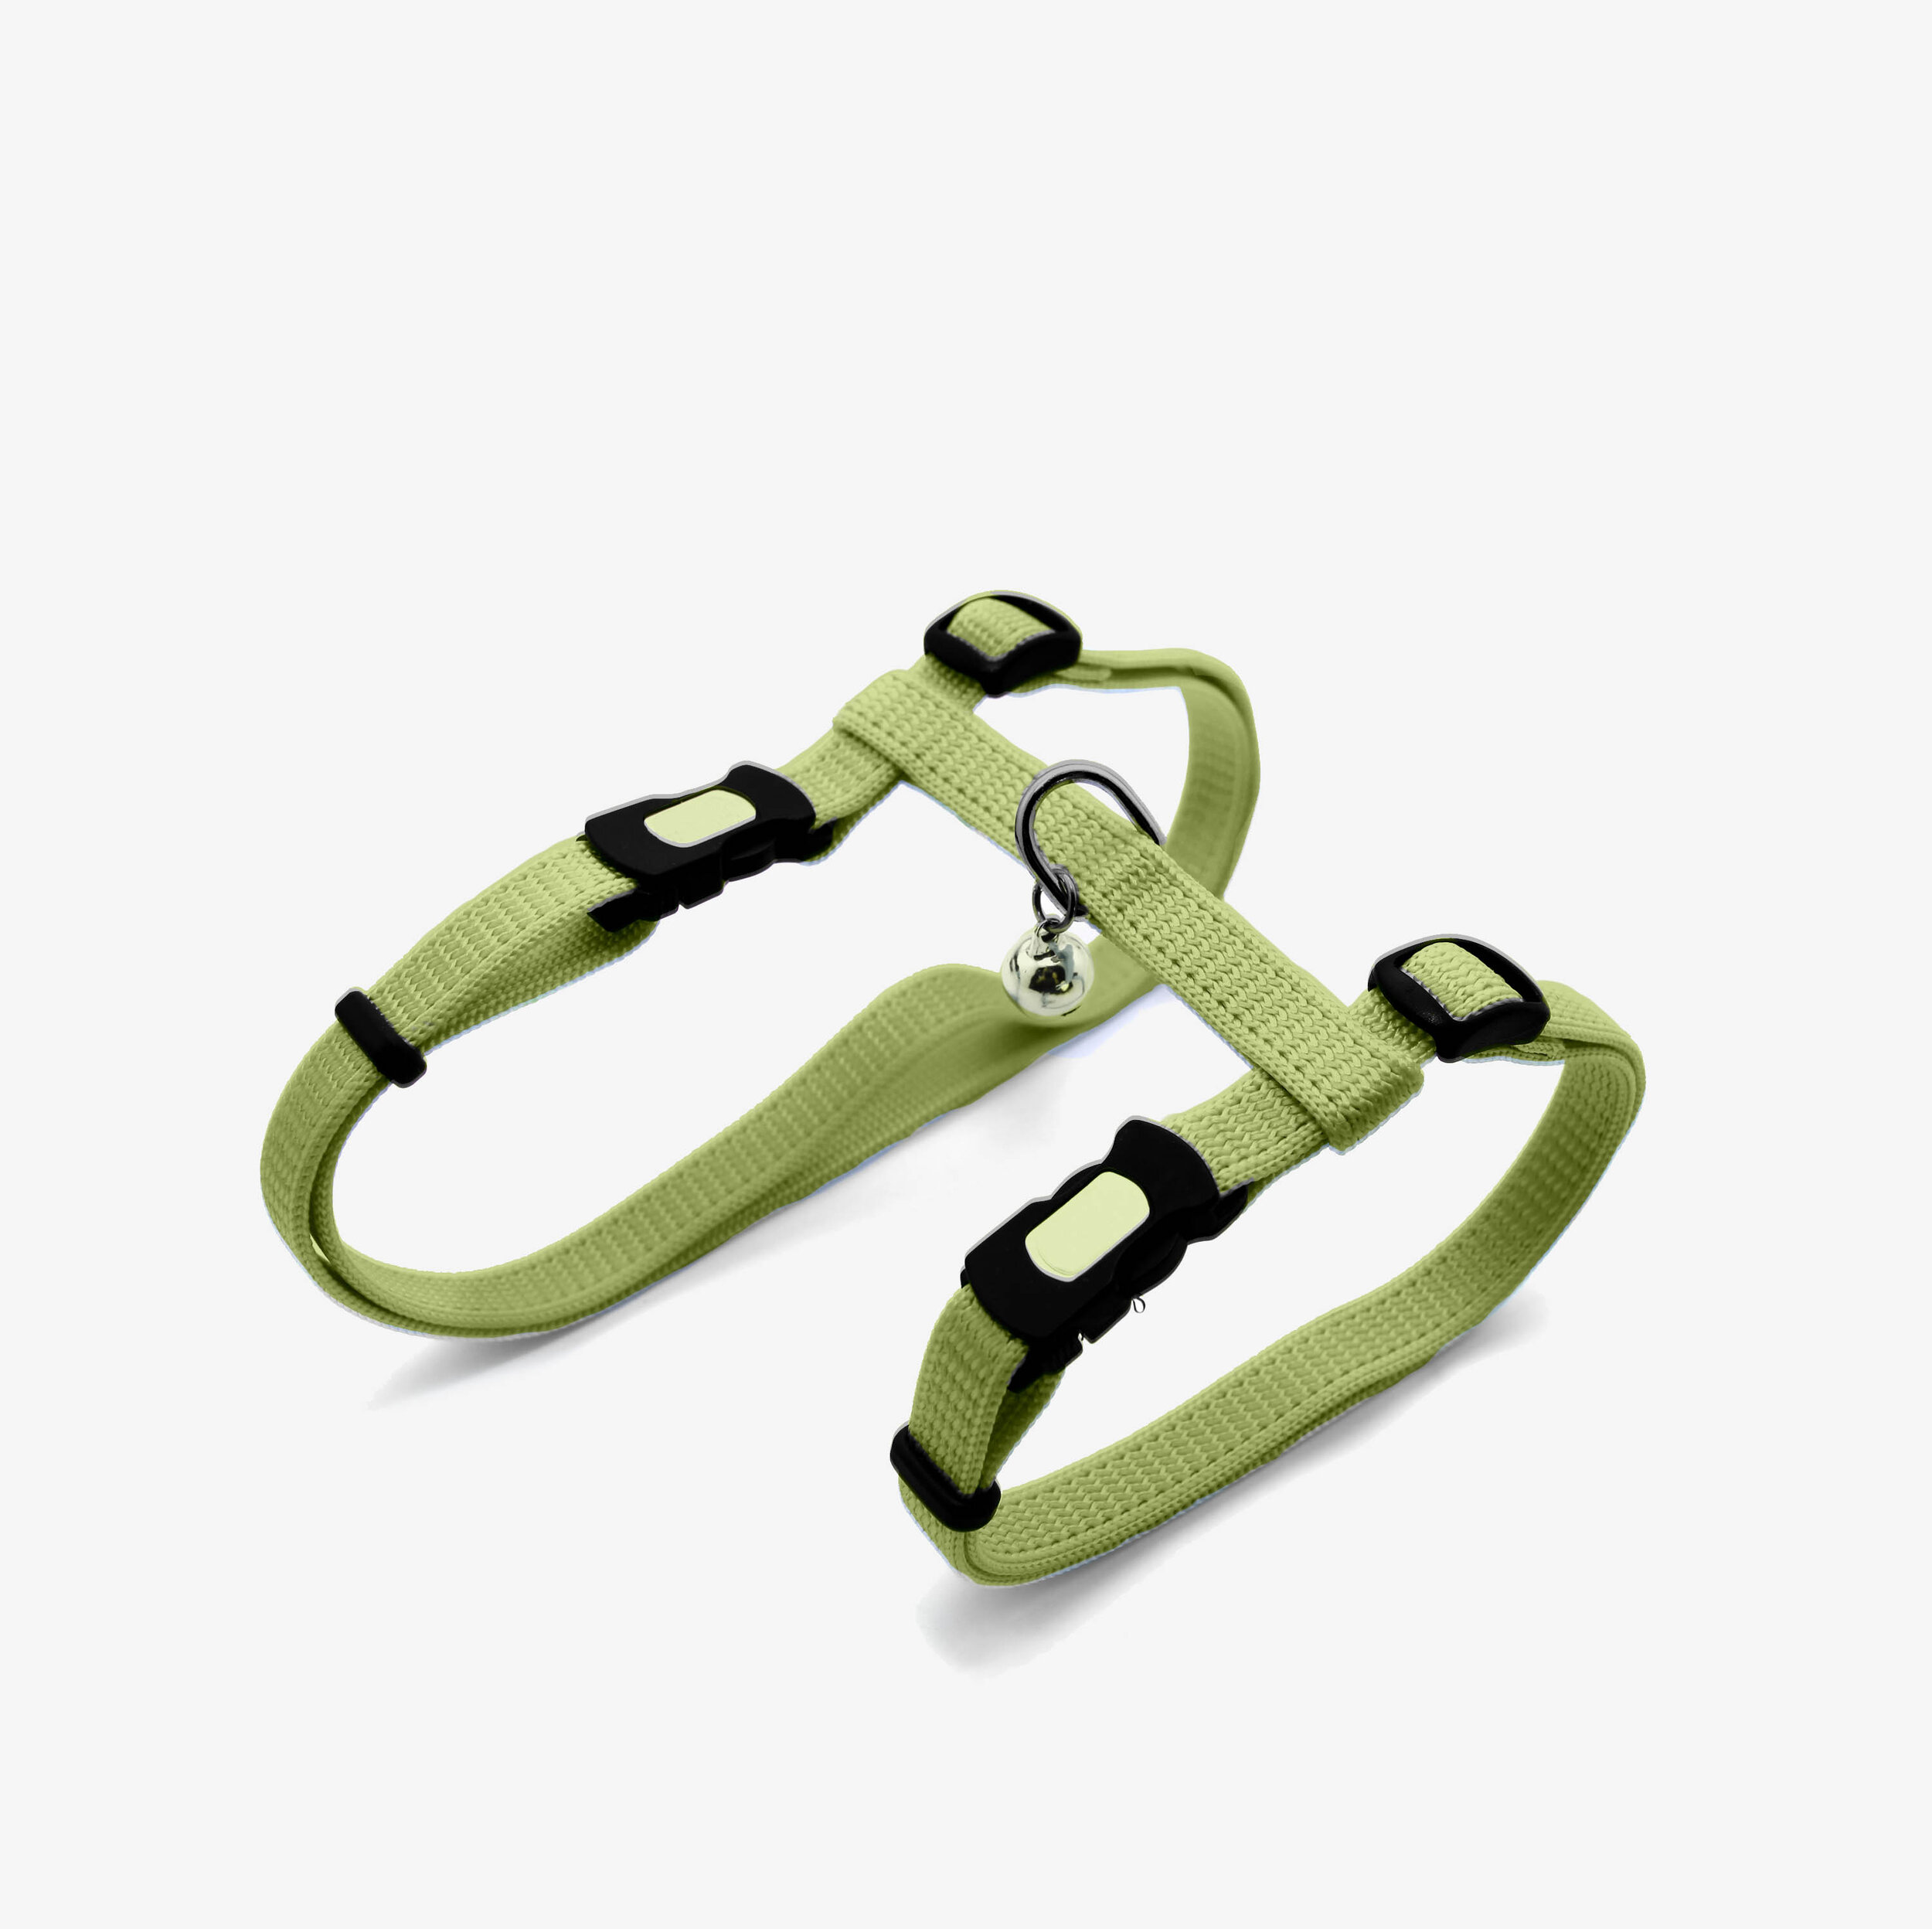 Mitzy dog harness in green